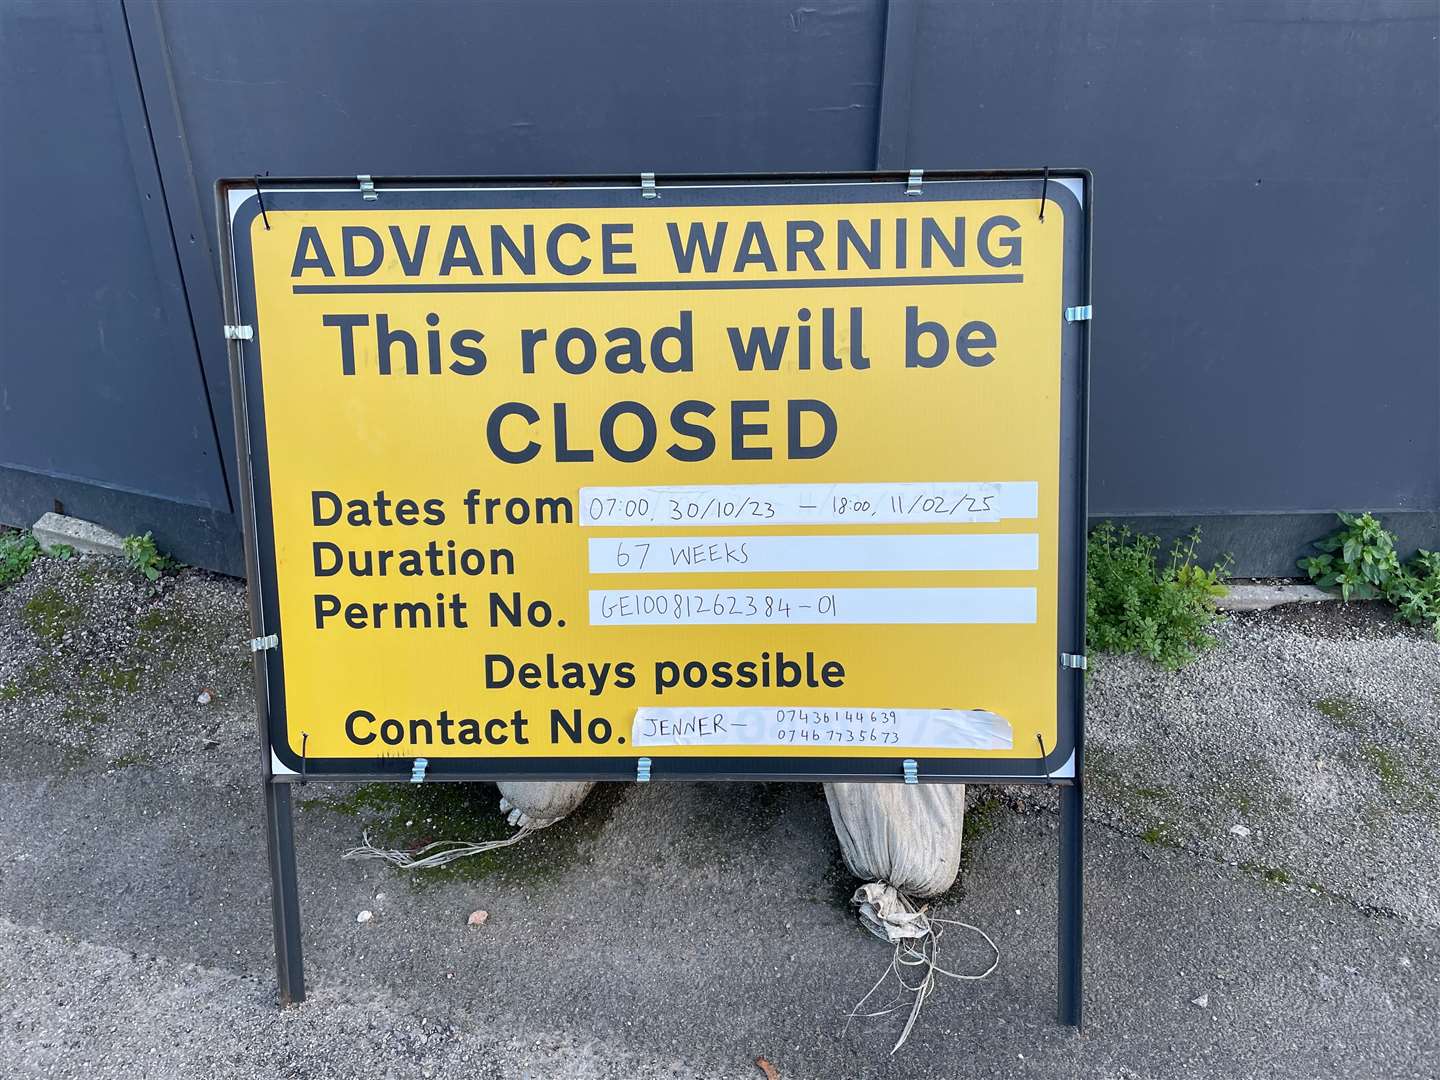 The road is set to be closed until 2025